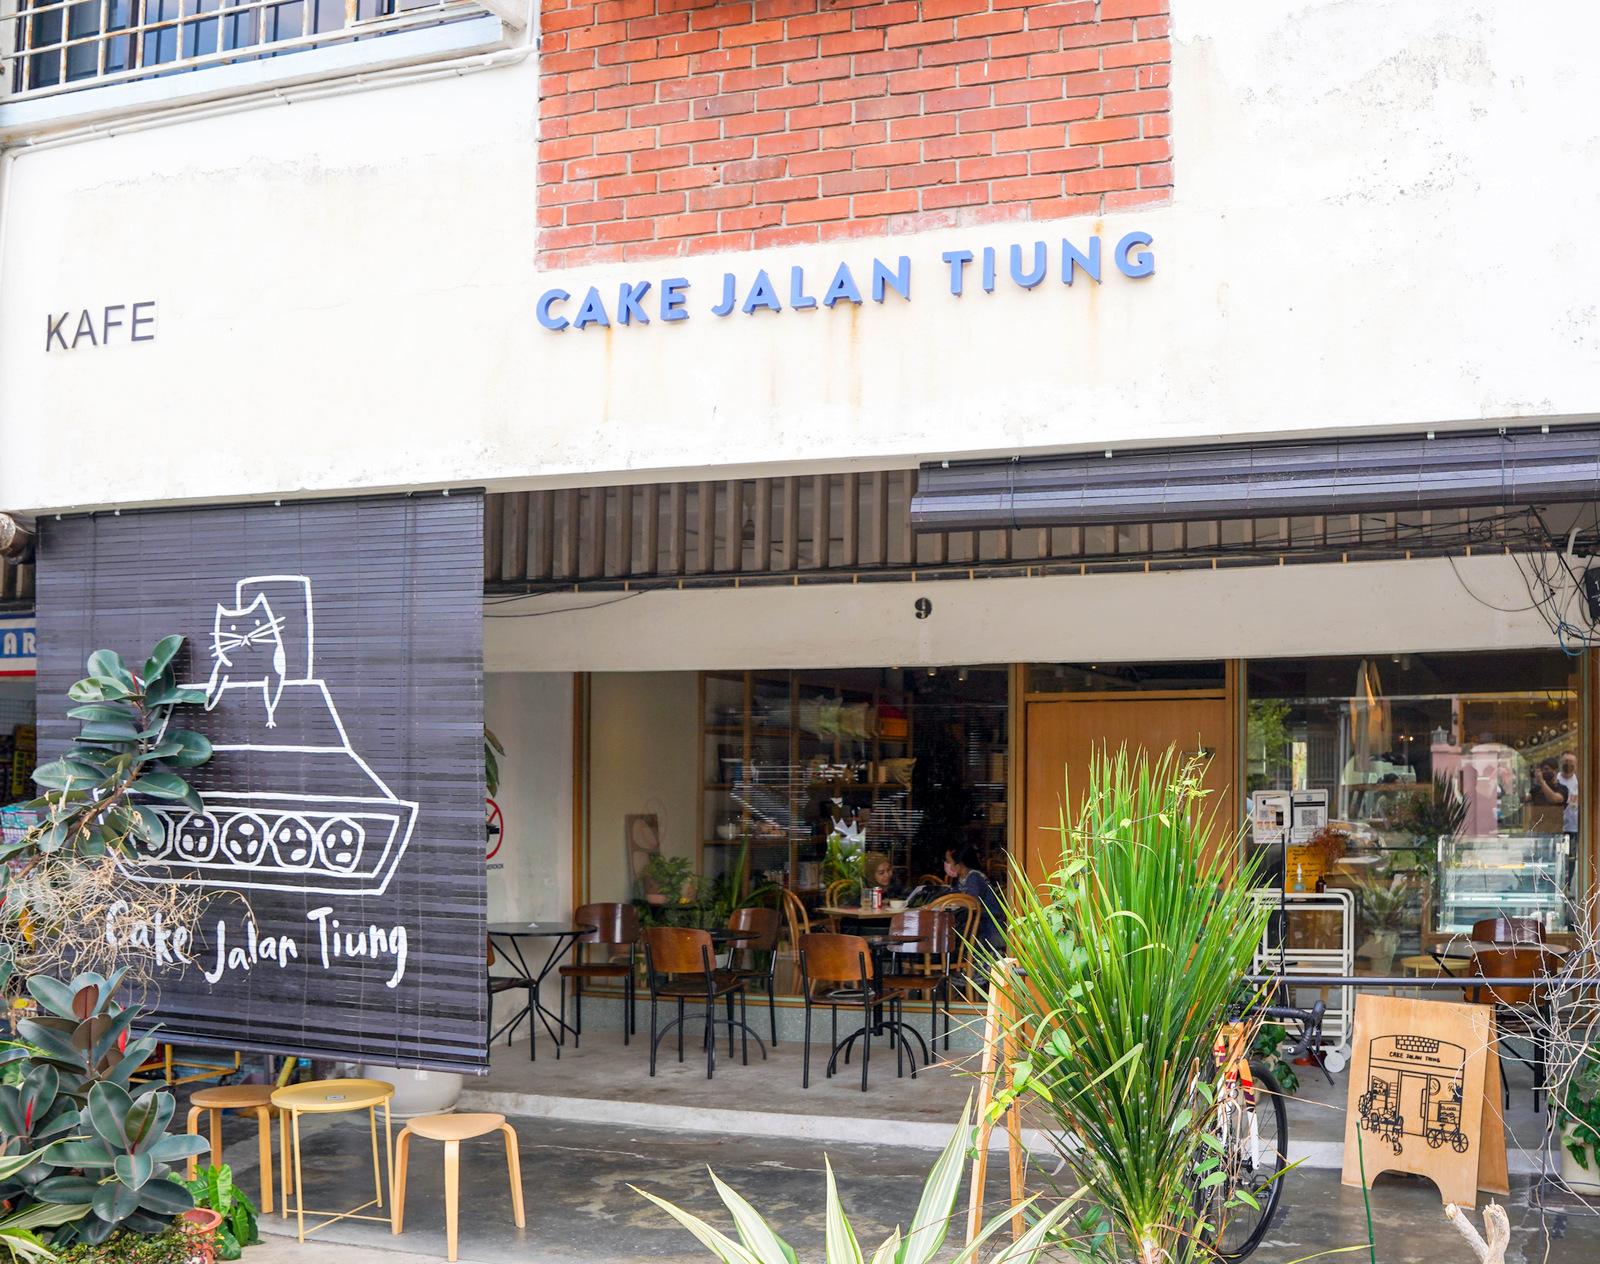 cake jalan tiung's second cafe serves scrumptious bakes in a neighbourhood hub with lived-in charm